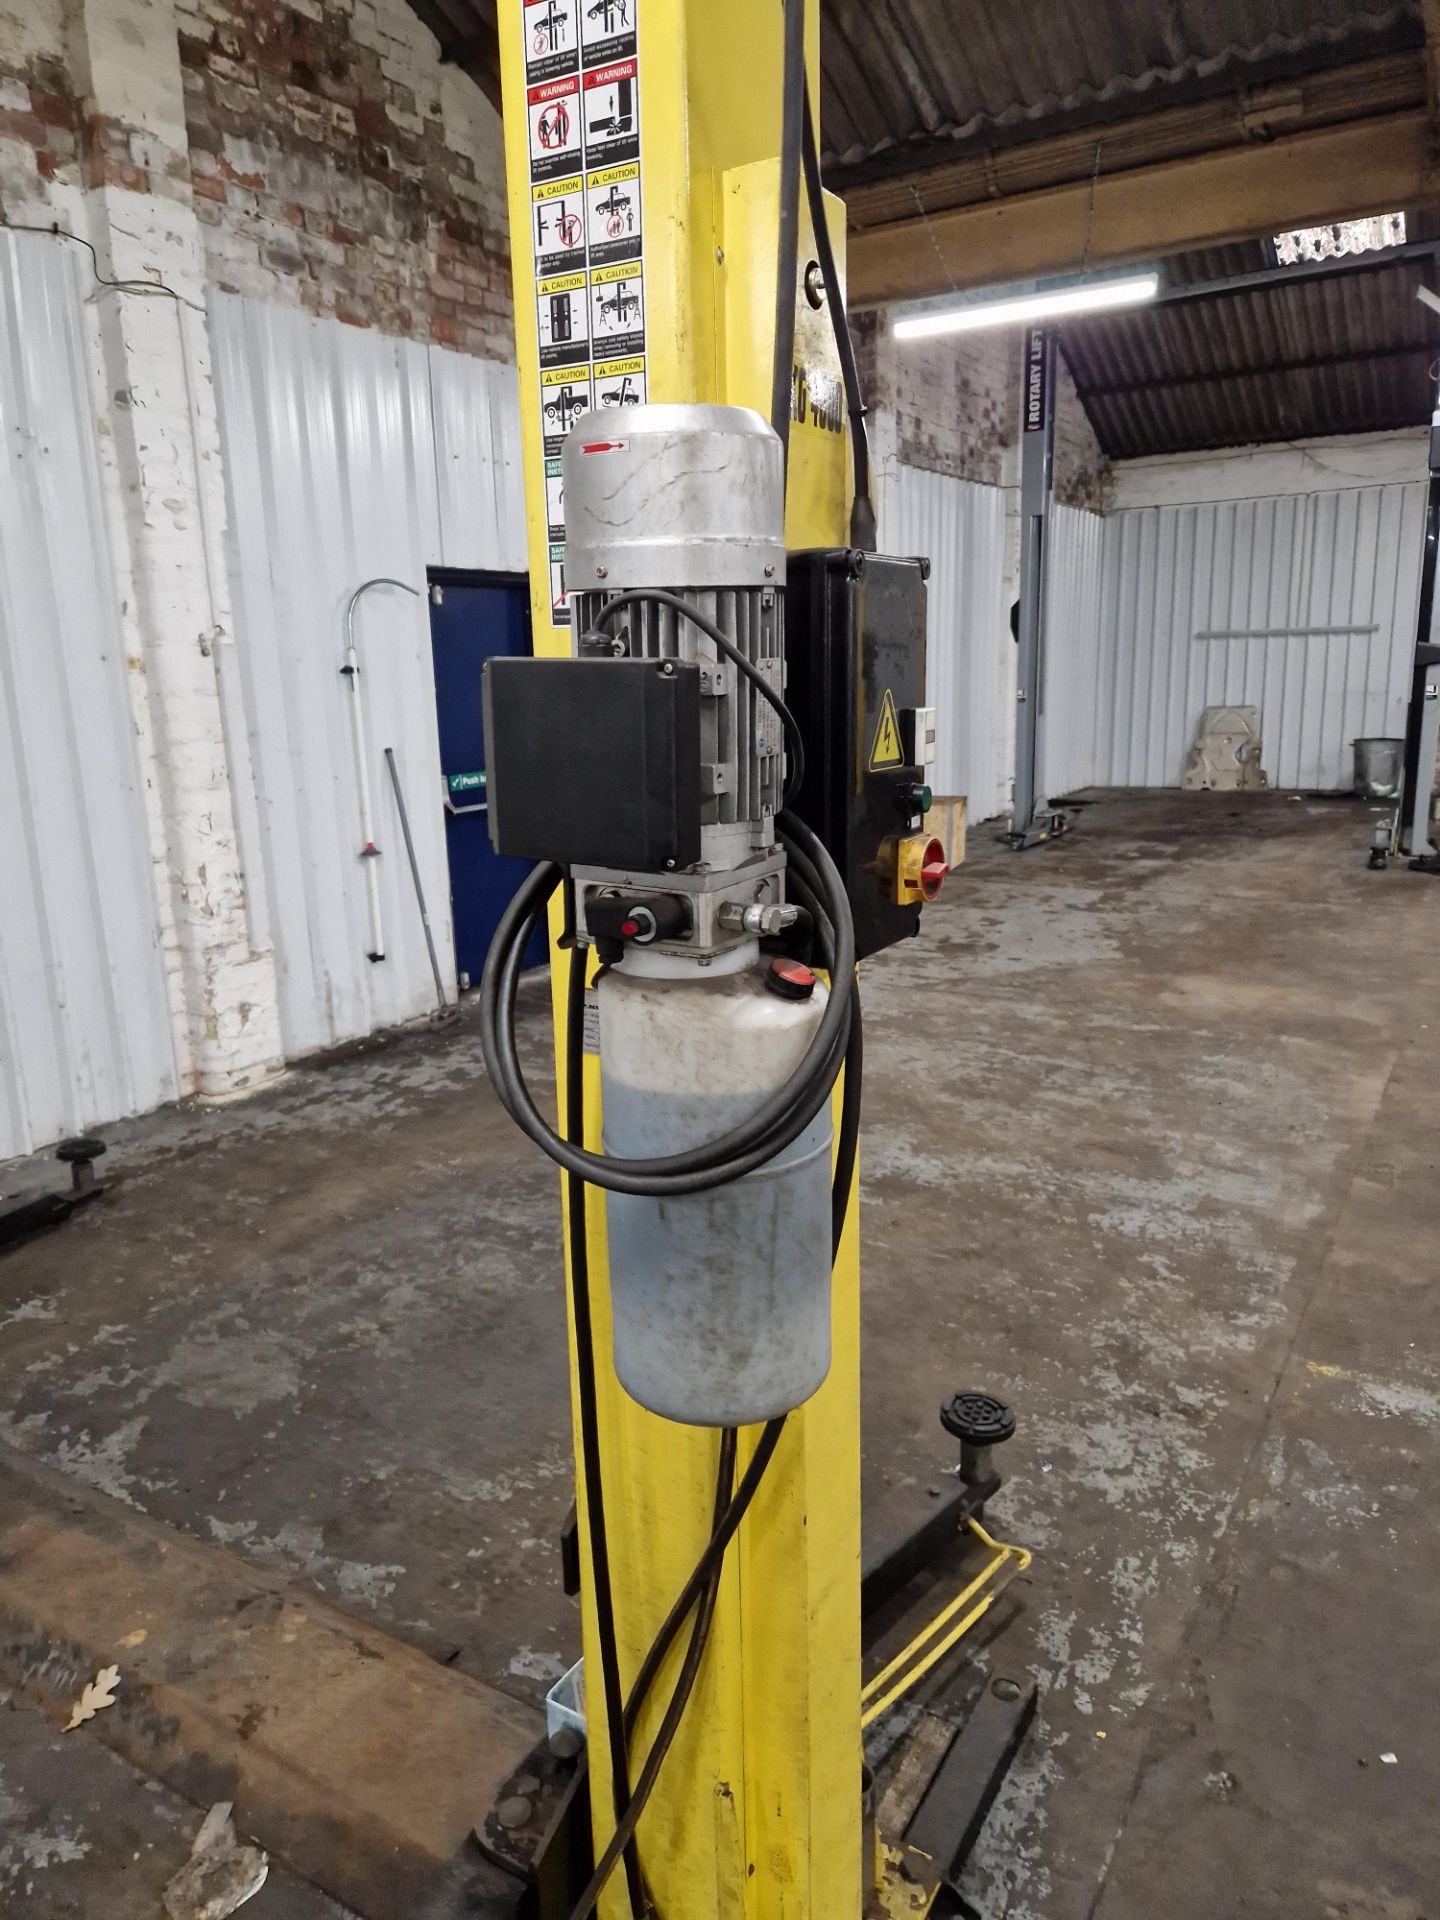 Dunlop Garage Equipment DL240/3 Twin Post Vehicle Lift, 4000KG Capacity, Year of Manufacture 2017, - Image 3 of 4